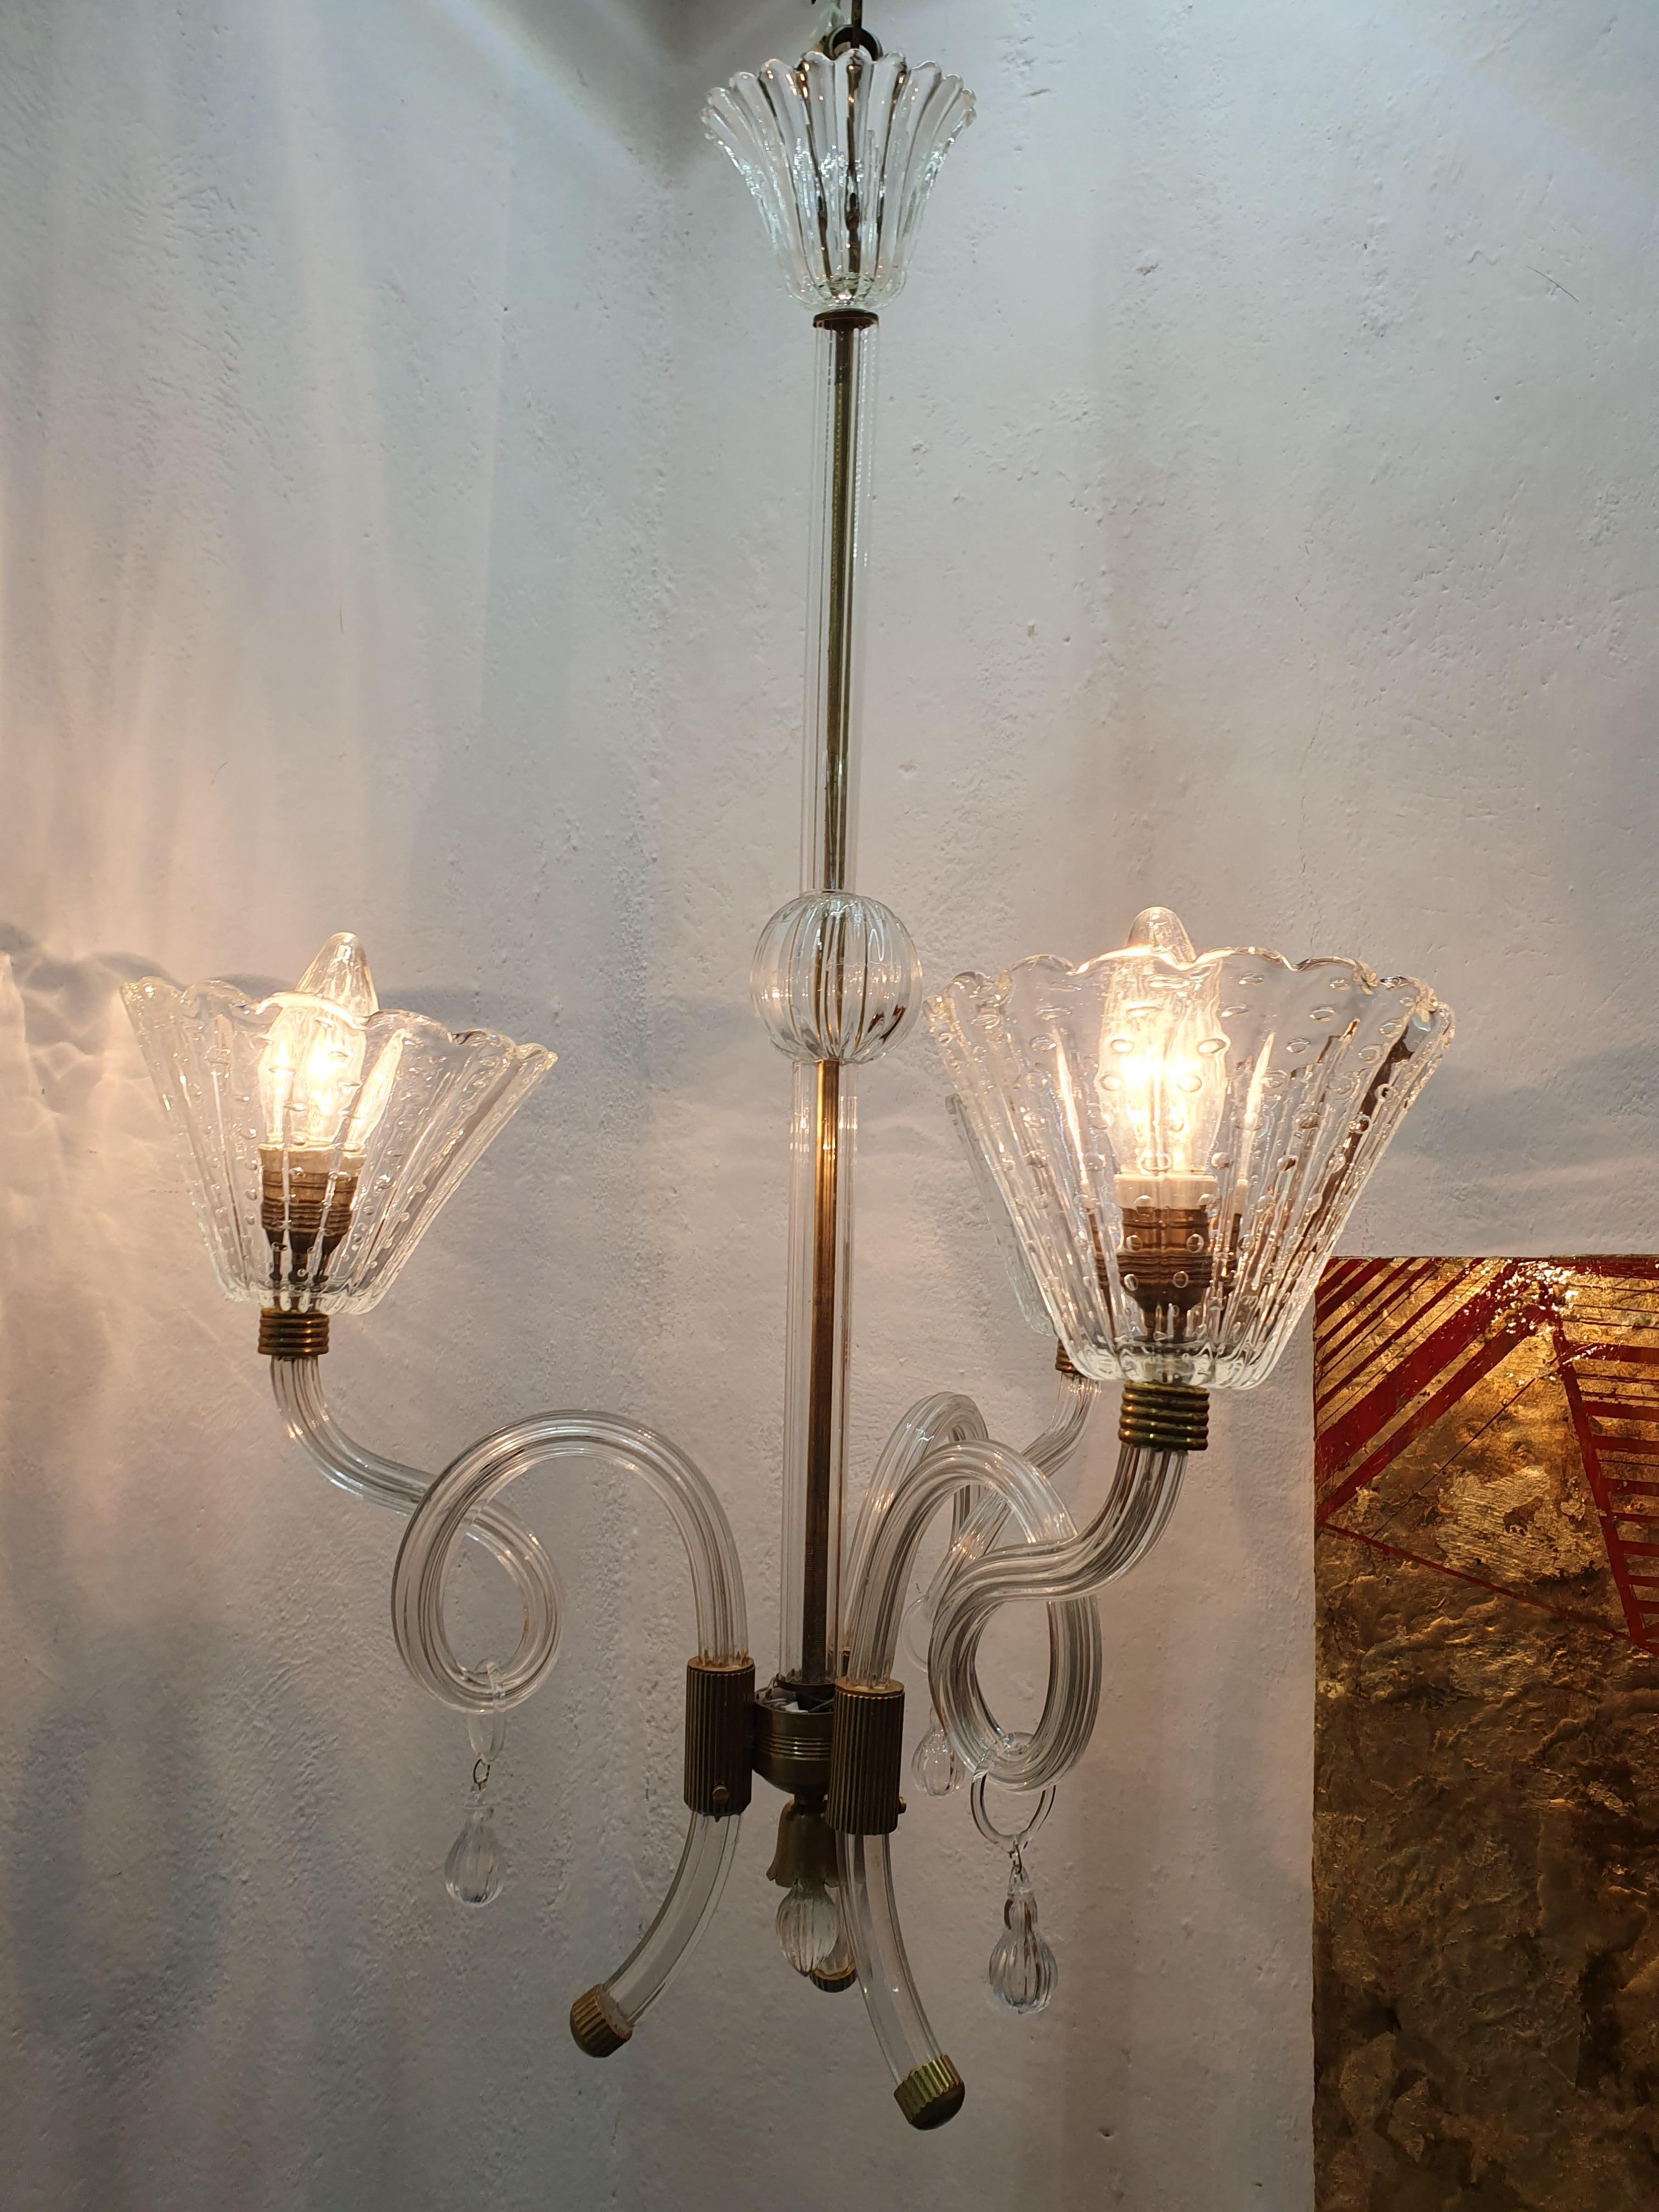 Mid-Century Modern Chandelier by Barovier Toso in Murano Glass, Italy circa 1950 For Sale 6